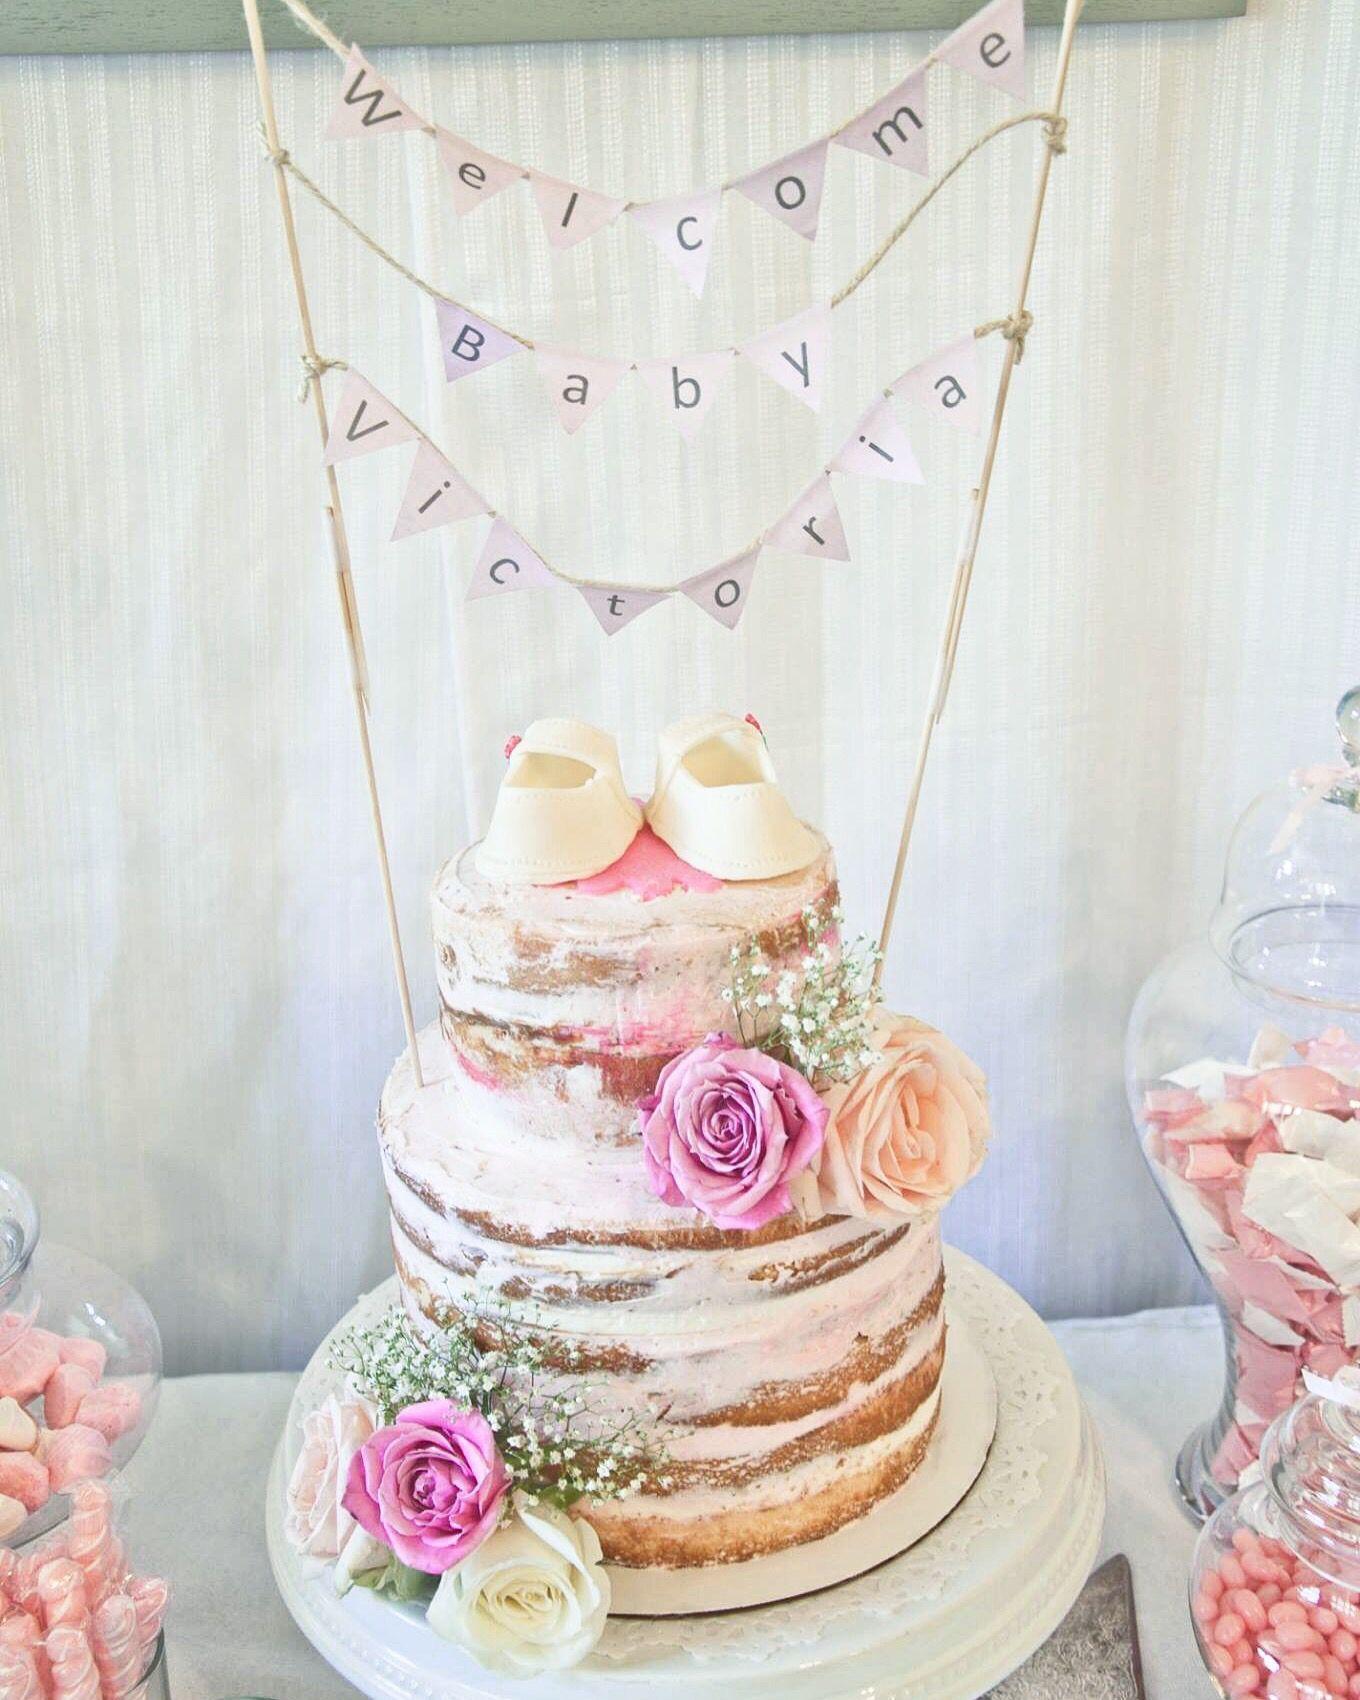 True N. reccomend Naked girl cake decorations